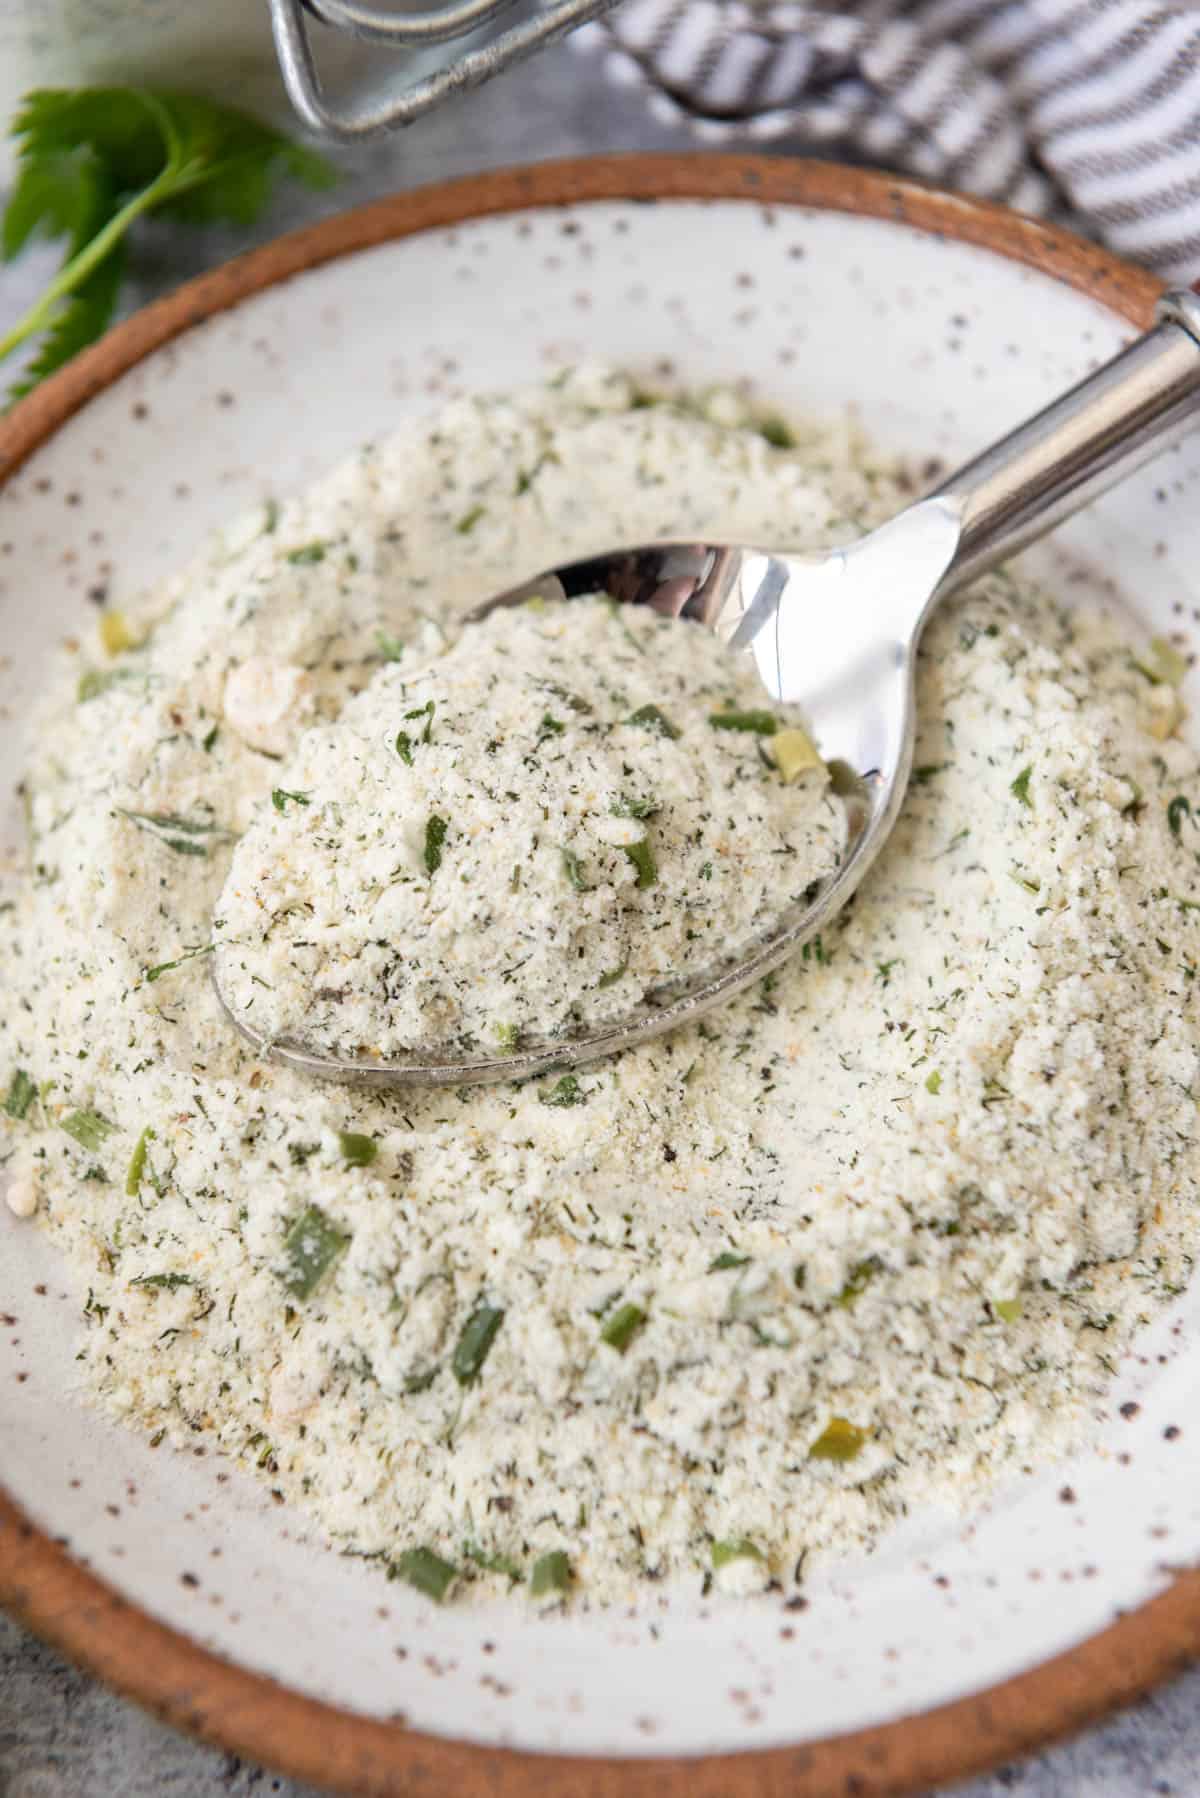 A small mound of homemade ranch seasoning made with powdered buttermilk on a plate with a spoon.